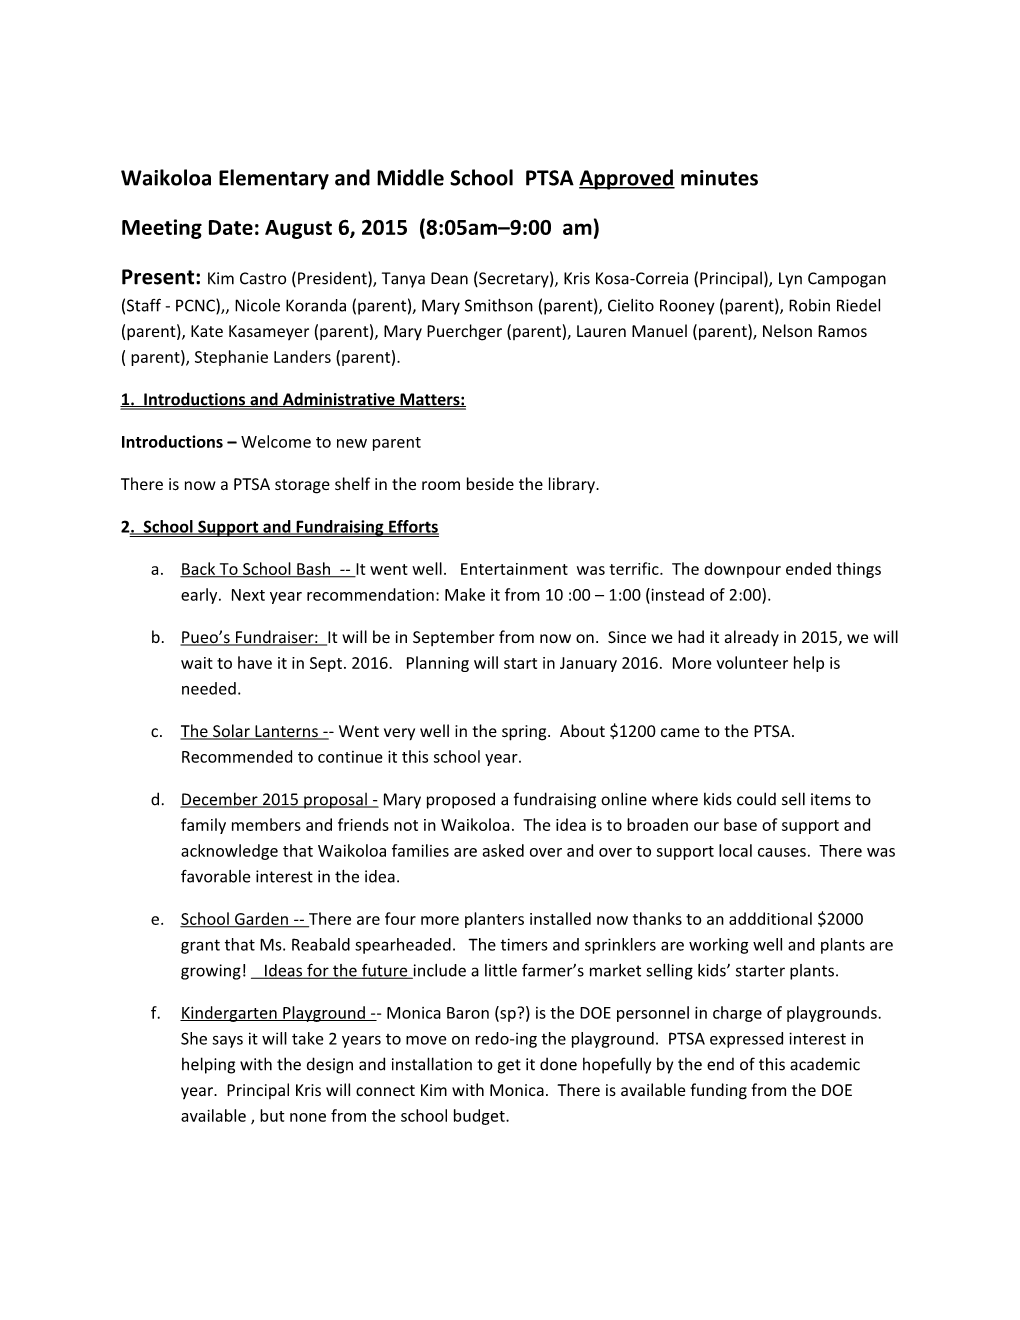 Waikoloa Elementary and Middle School PTSA Approved Minutes